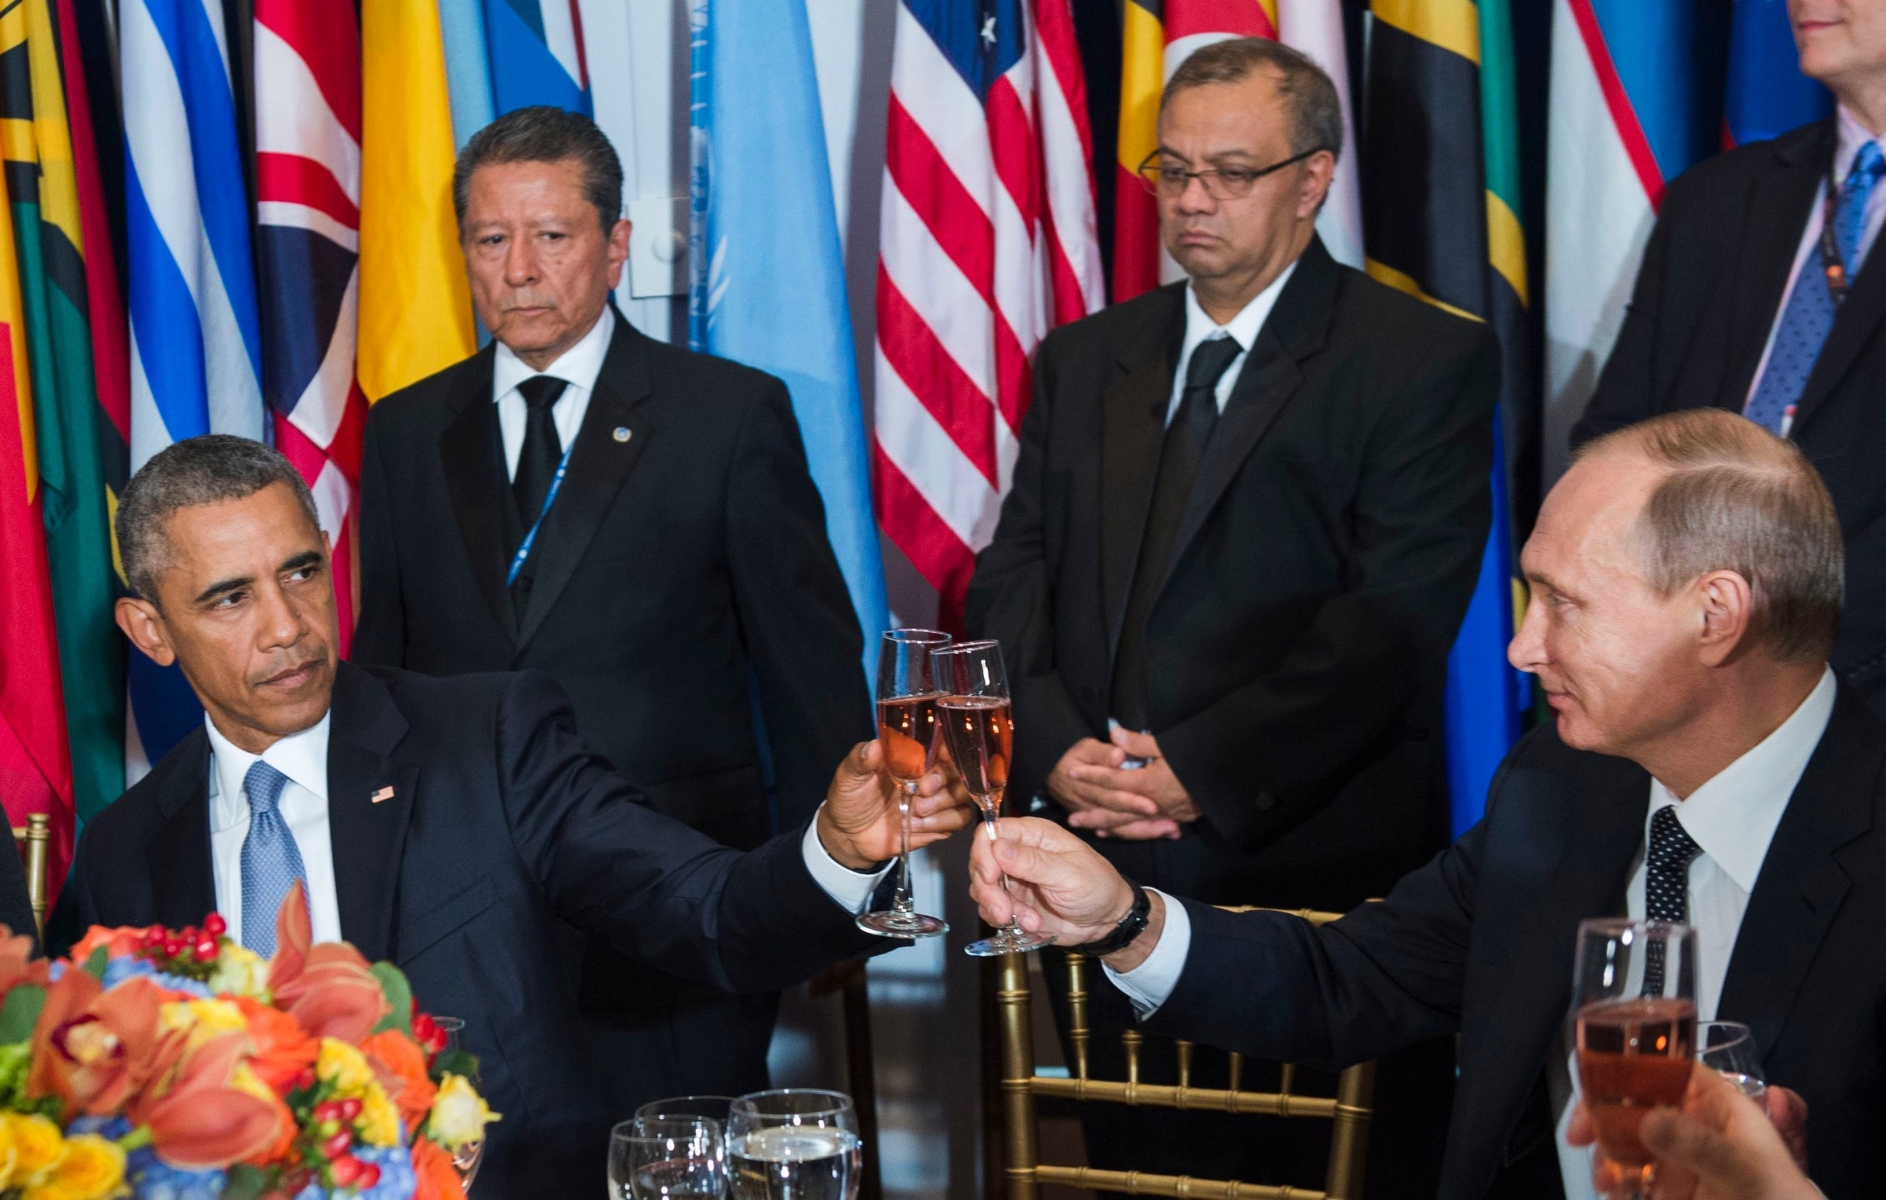 epa04955286 A handout picture provided by the United Nations (UN) on 29 September 2015 shows US President Barack Obama (L) and his Russian counterpart Vladimir Putin (R) sharing a toast at a luncheon hosted by UN Secretary-General Ban Ki-moon (not pictured) in honor of world leaders attending the general debate of the General Assembly, in New York, New York, USA, 28 September 2015.  EPA/UNITED NATIONS/AMANDA VOISARD ALTERNATIVE CROP HANDOUT EDITORIAL USE ONLY/NO SALES USA RUSSIA UN LUNCHEON